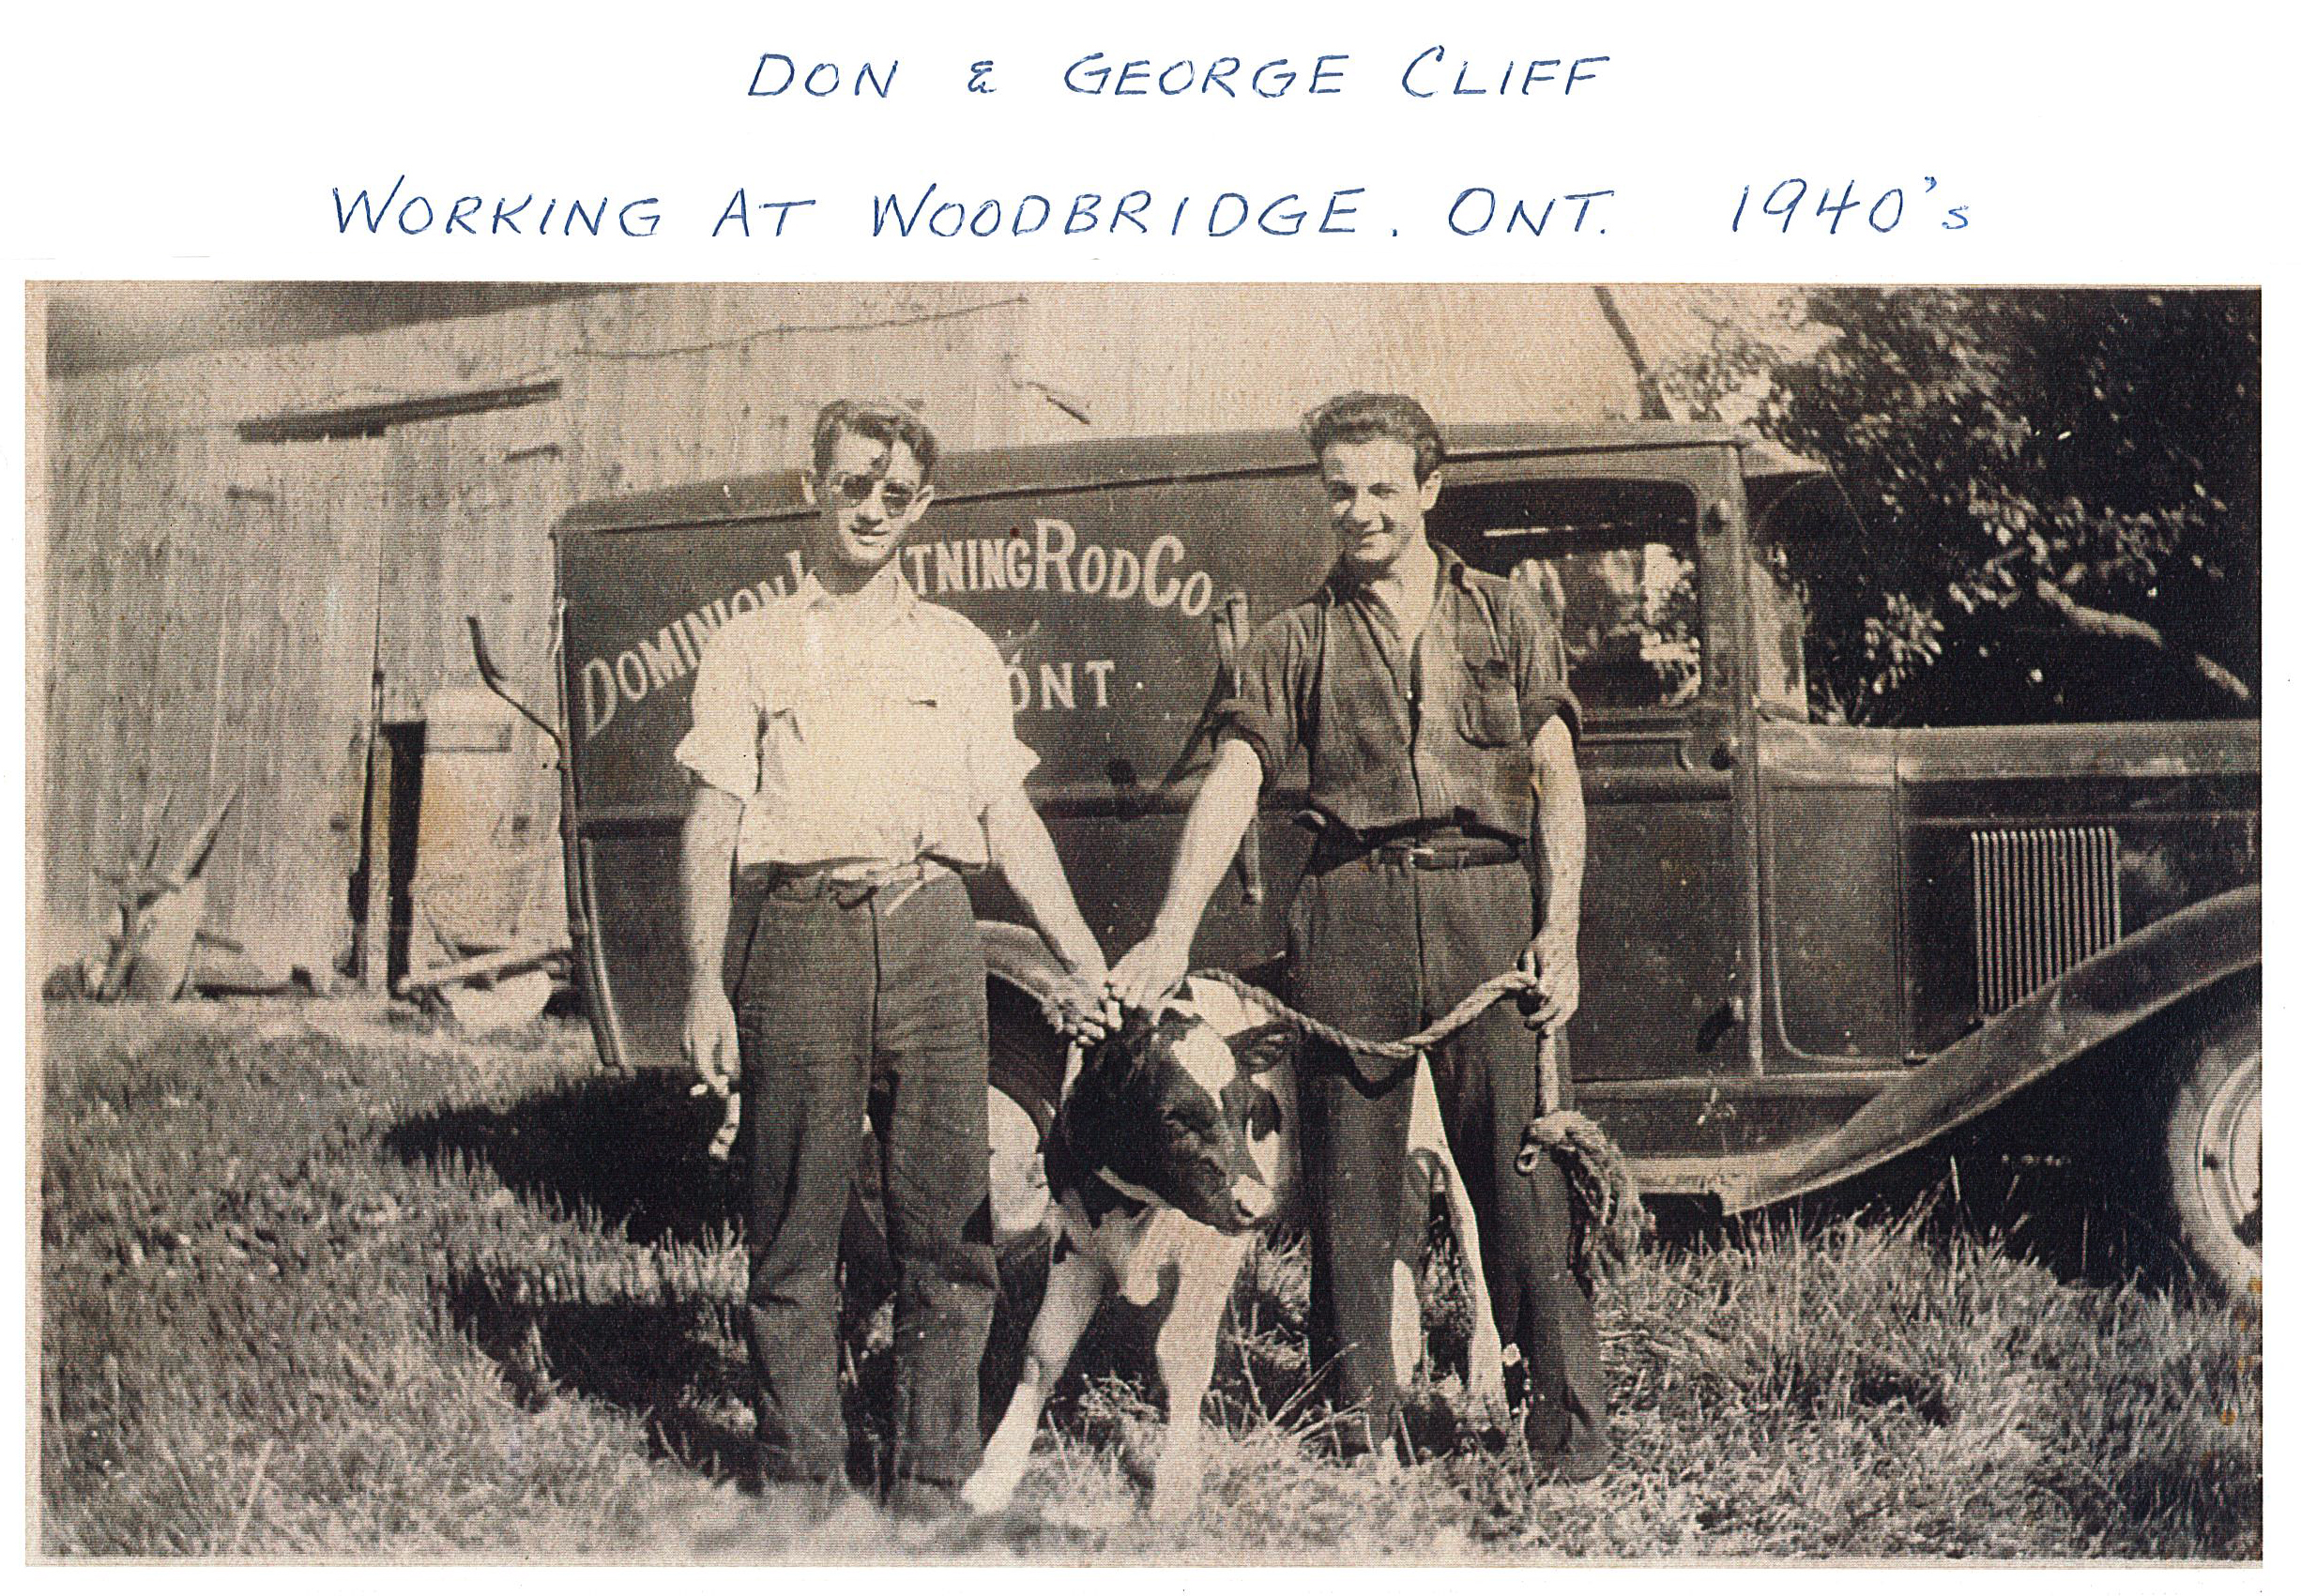 Don Cliff and George Cliff working in Woodbridge, Ontario in 1940